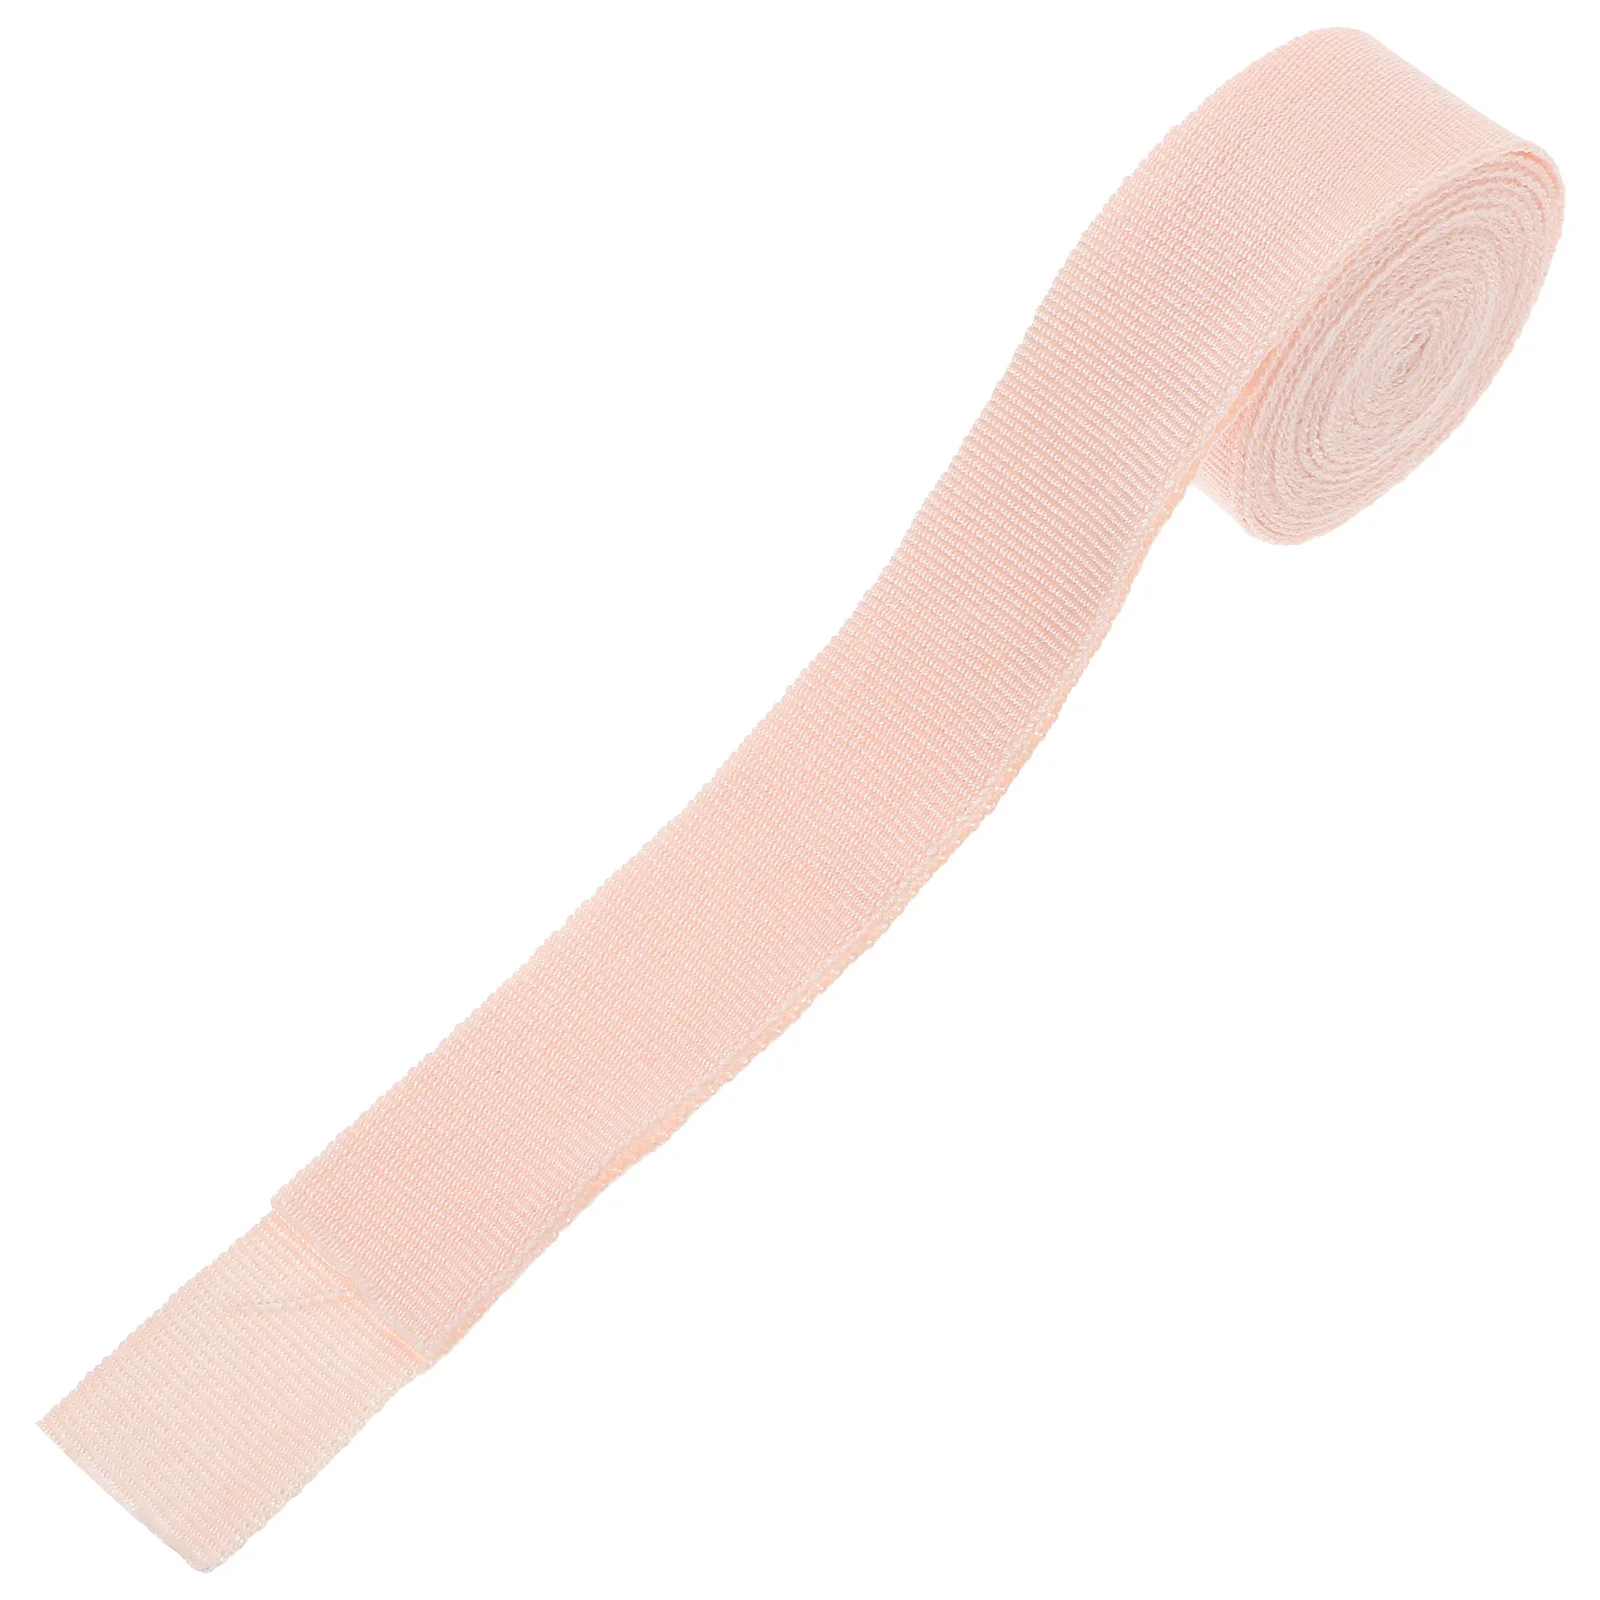 Special Ribbons Shoe for Shoes Pink Strap-ons Dedicated Canvas Ballet Dancing Pointed Miss Laces